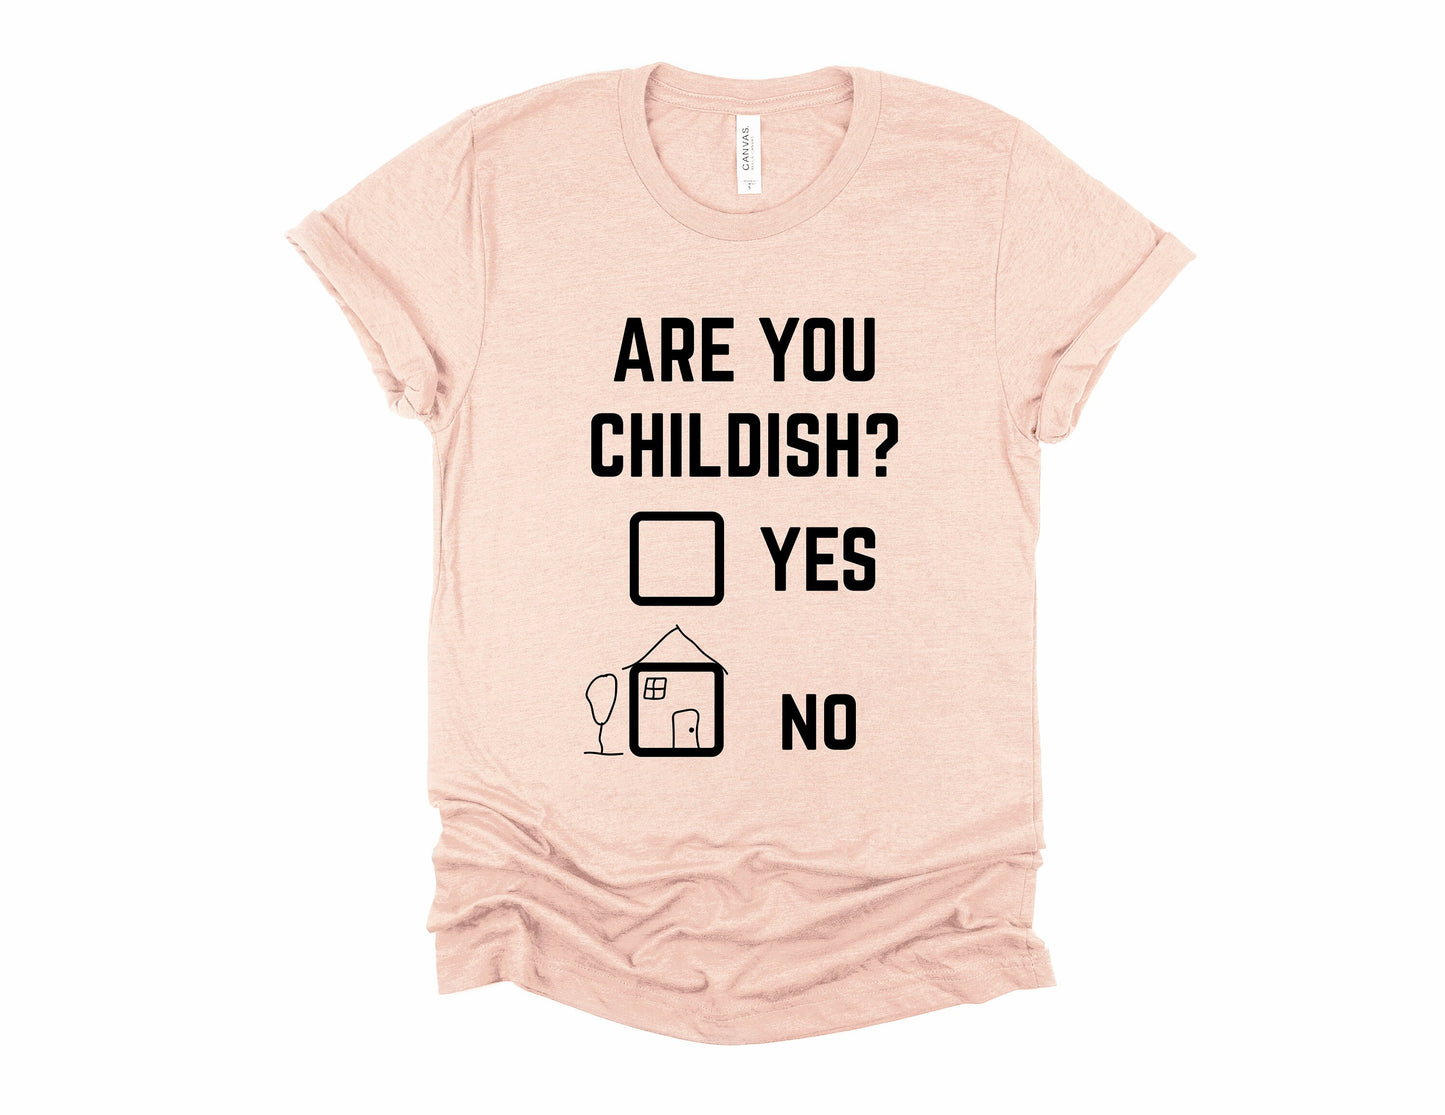 Are You Childish? Funny Kid at Heart Unisex Soft Tee T-shirt for Women or Men